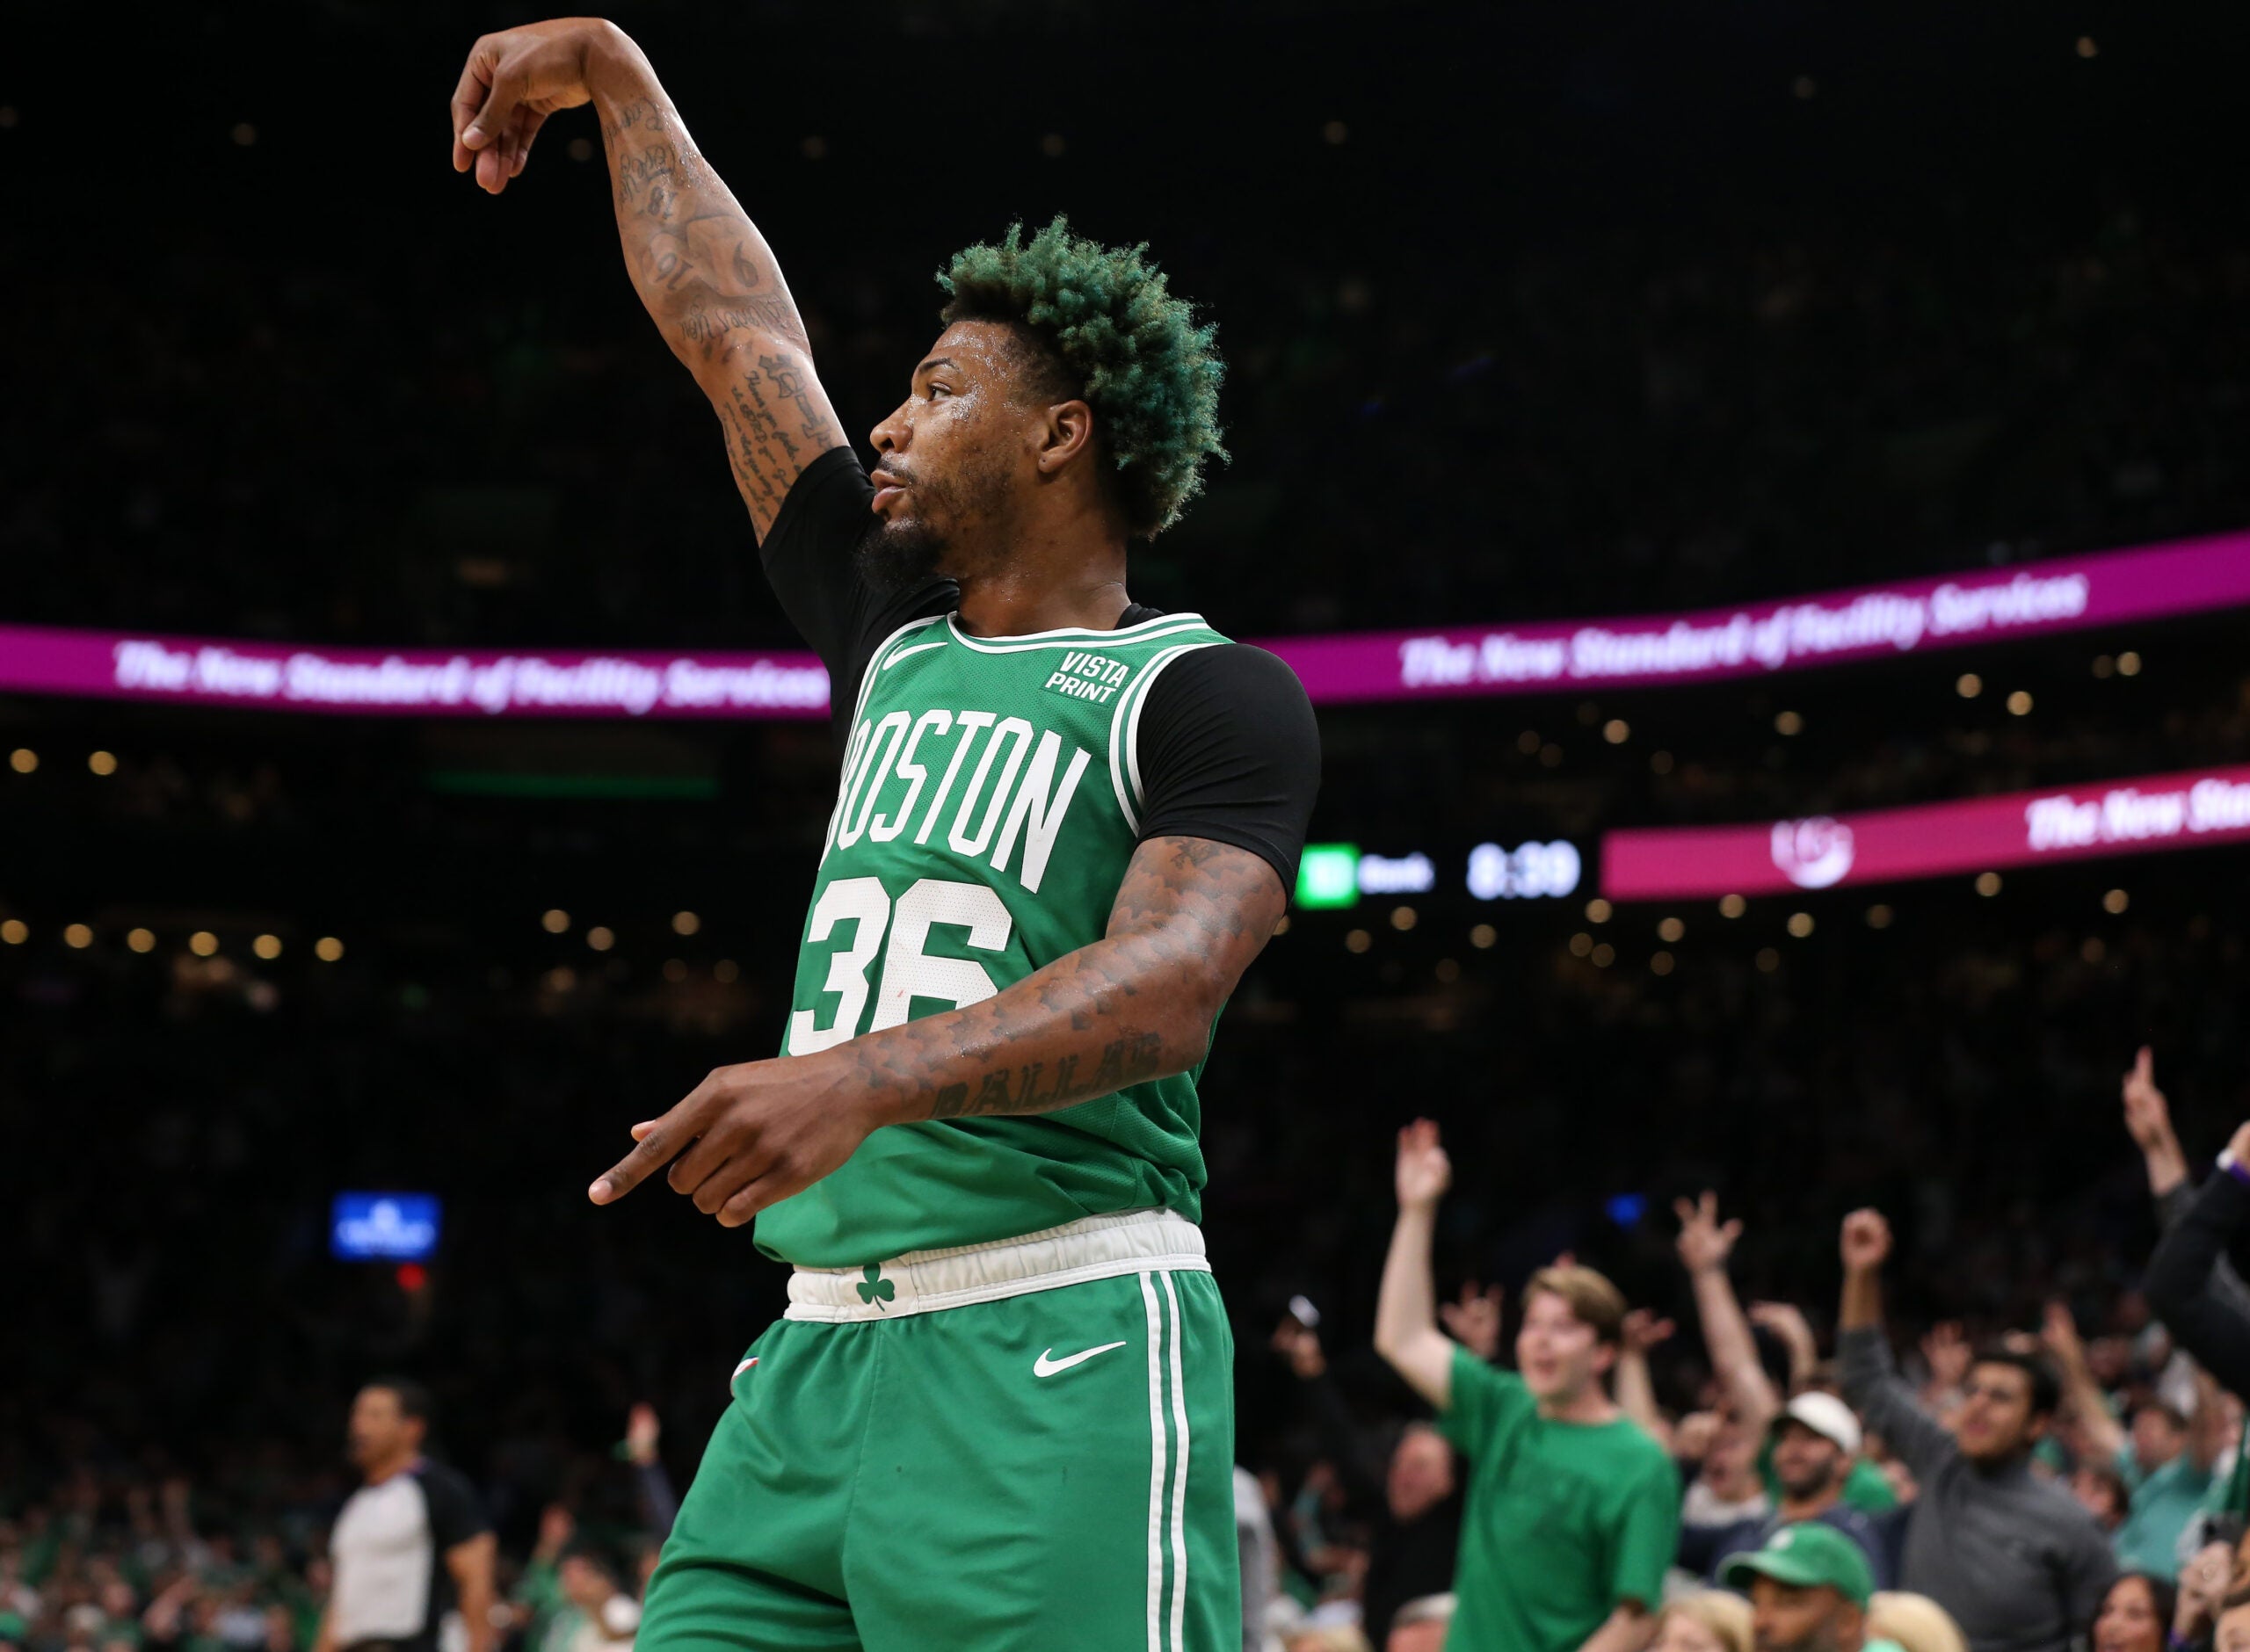 The Celtics Marcus Smart (36) watches as he hit an early first quarter three pointer. The Boston Celtics hosted the Miami Heat for Game Five of their NBA Eastern Conference Championship series at the TD Garden.